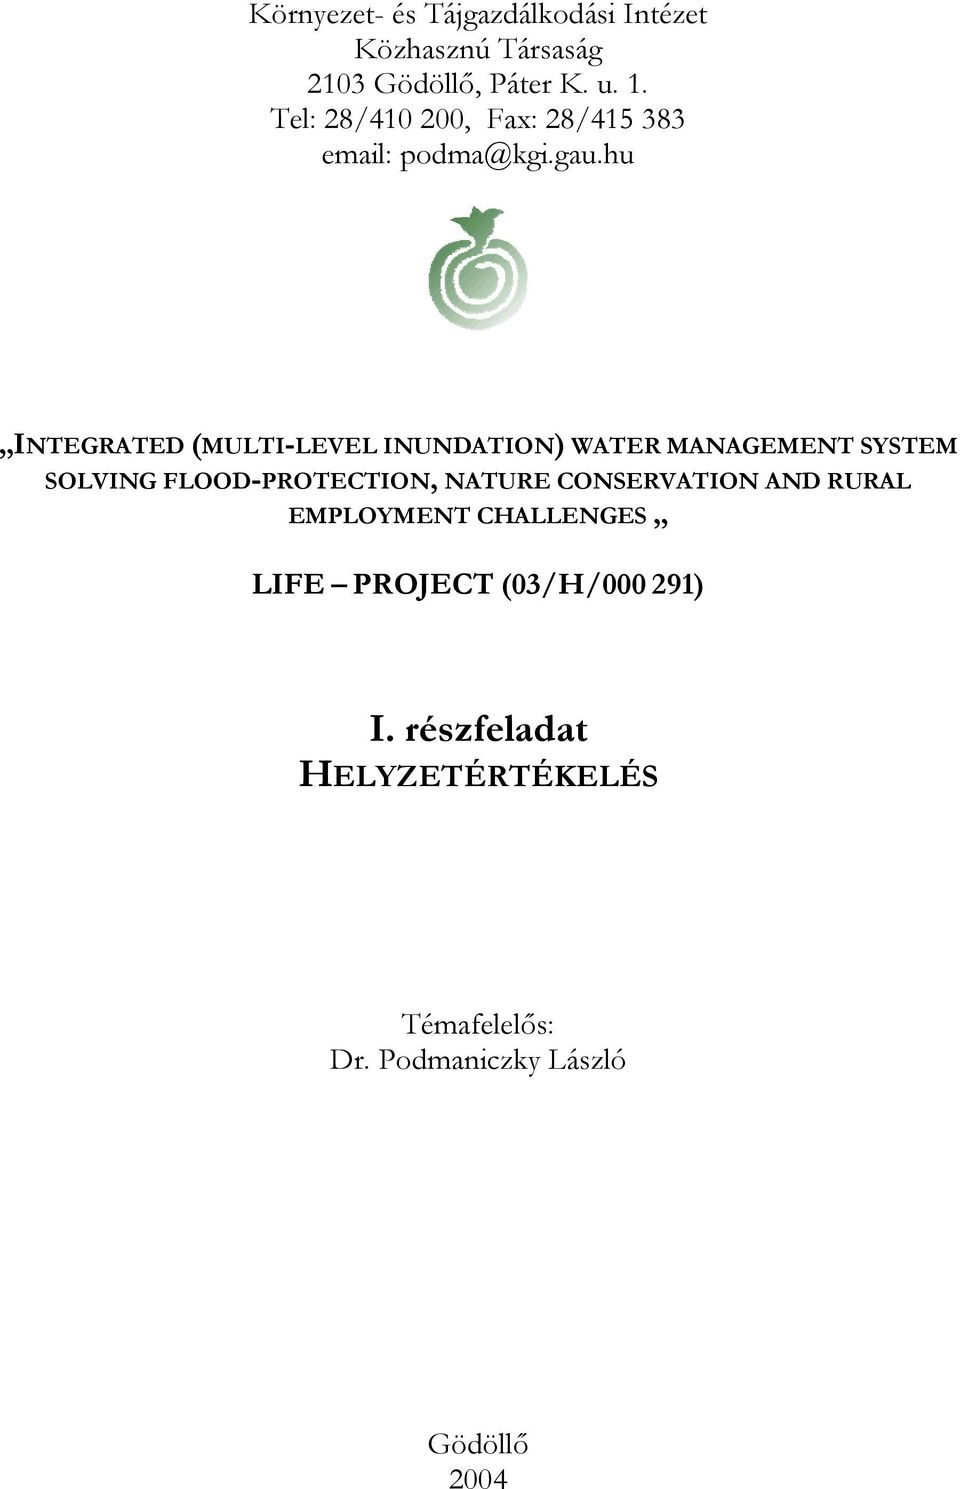 hu INTEGRATED (MULTI-LEVEL INUNDATION) WATER MANAGEMENT SYSTEM SOLVING FLOOD-PROTECTION, NATURE